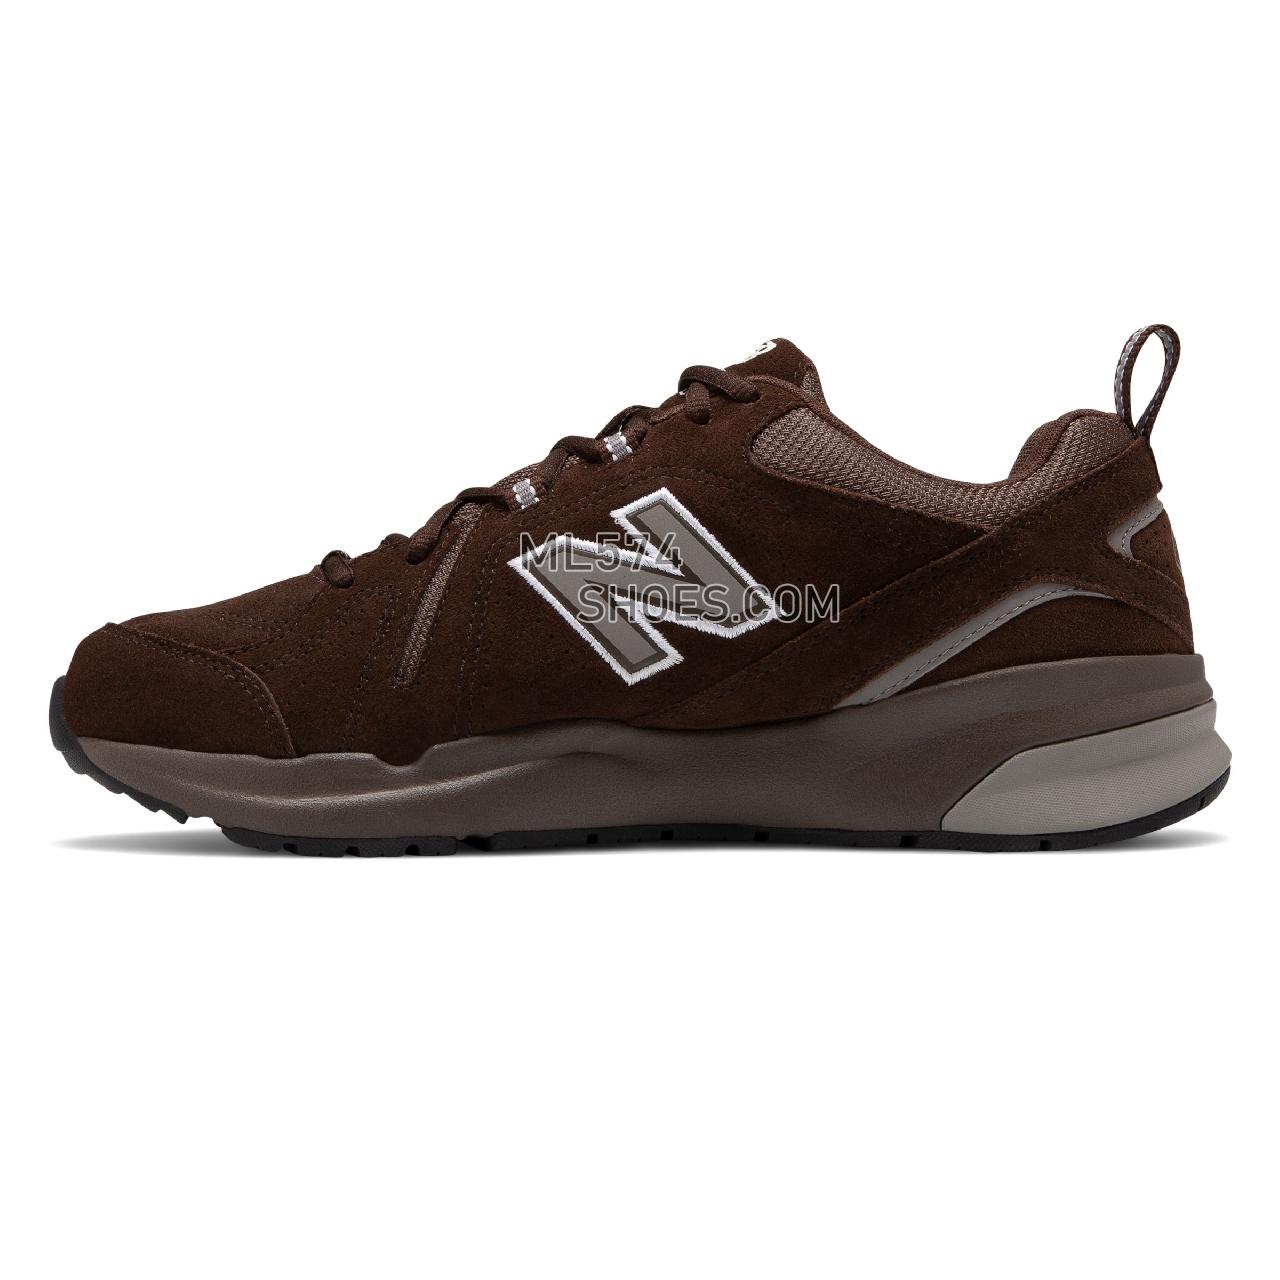 New Balance 608v5 - Men's Everyday Trainers - Chocolate Brown with White - MX608UB5